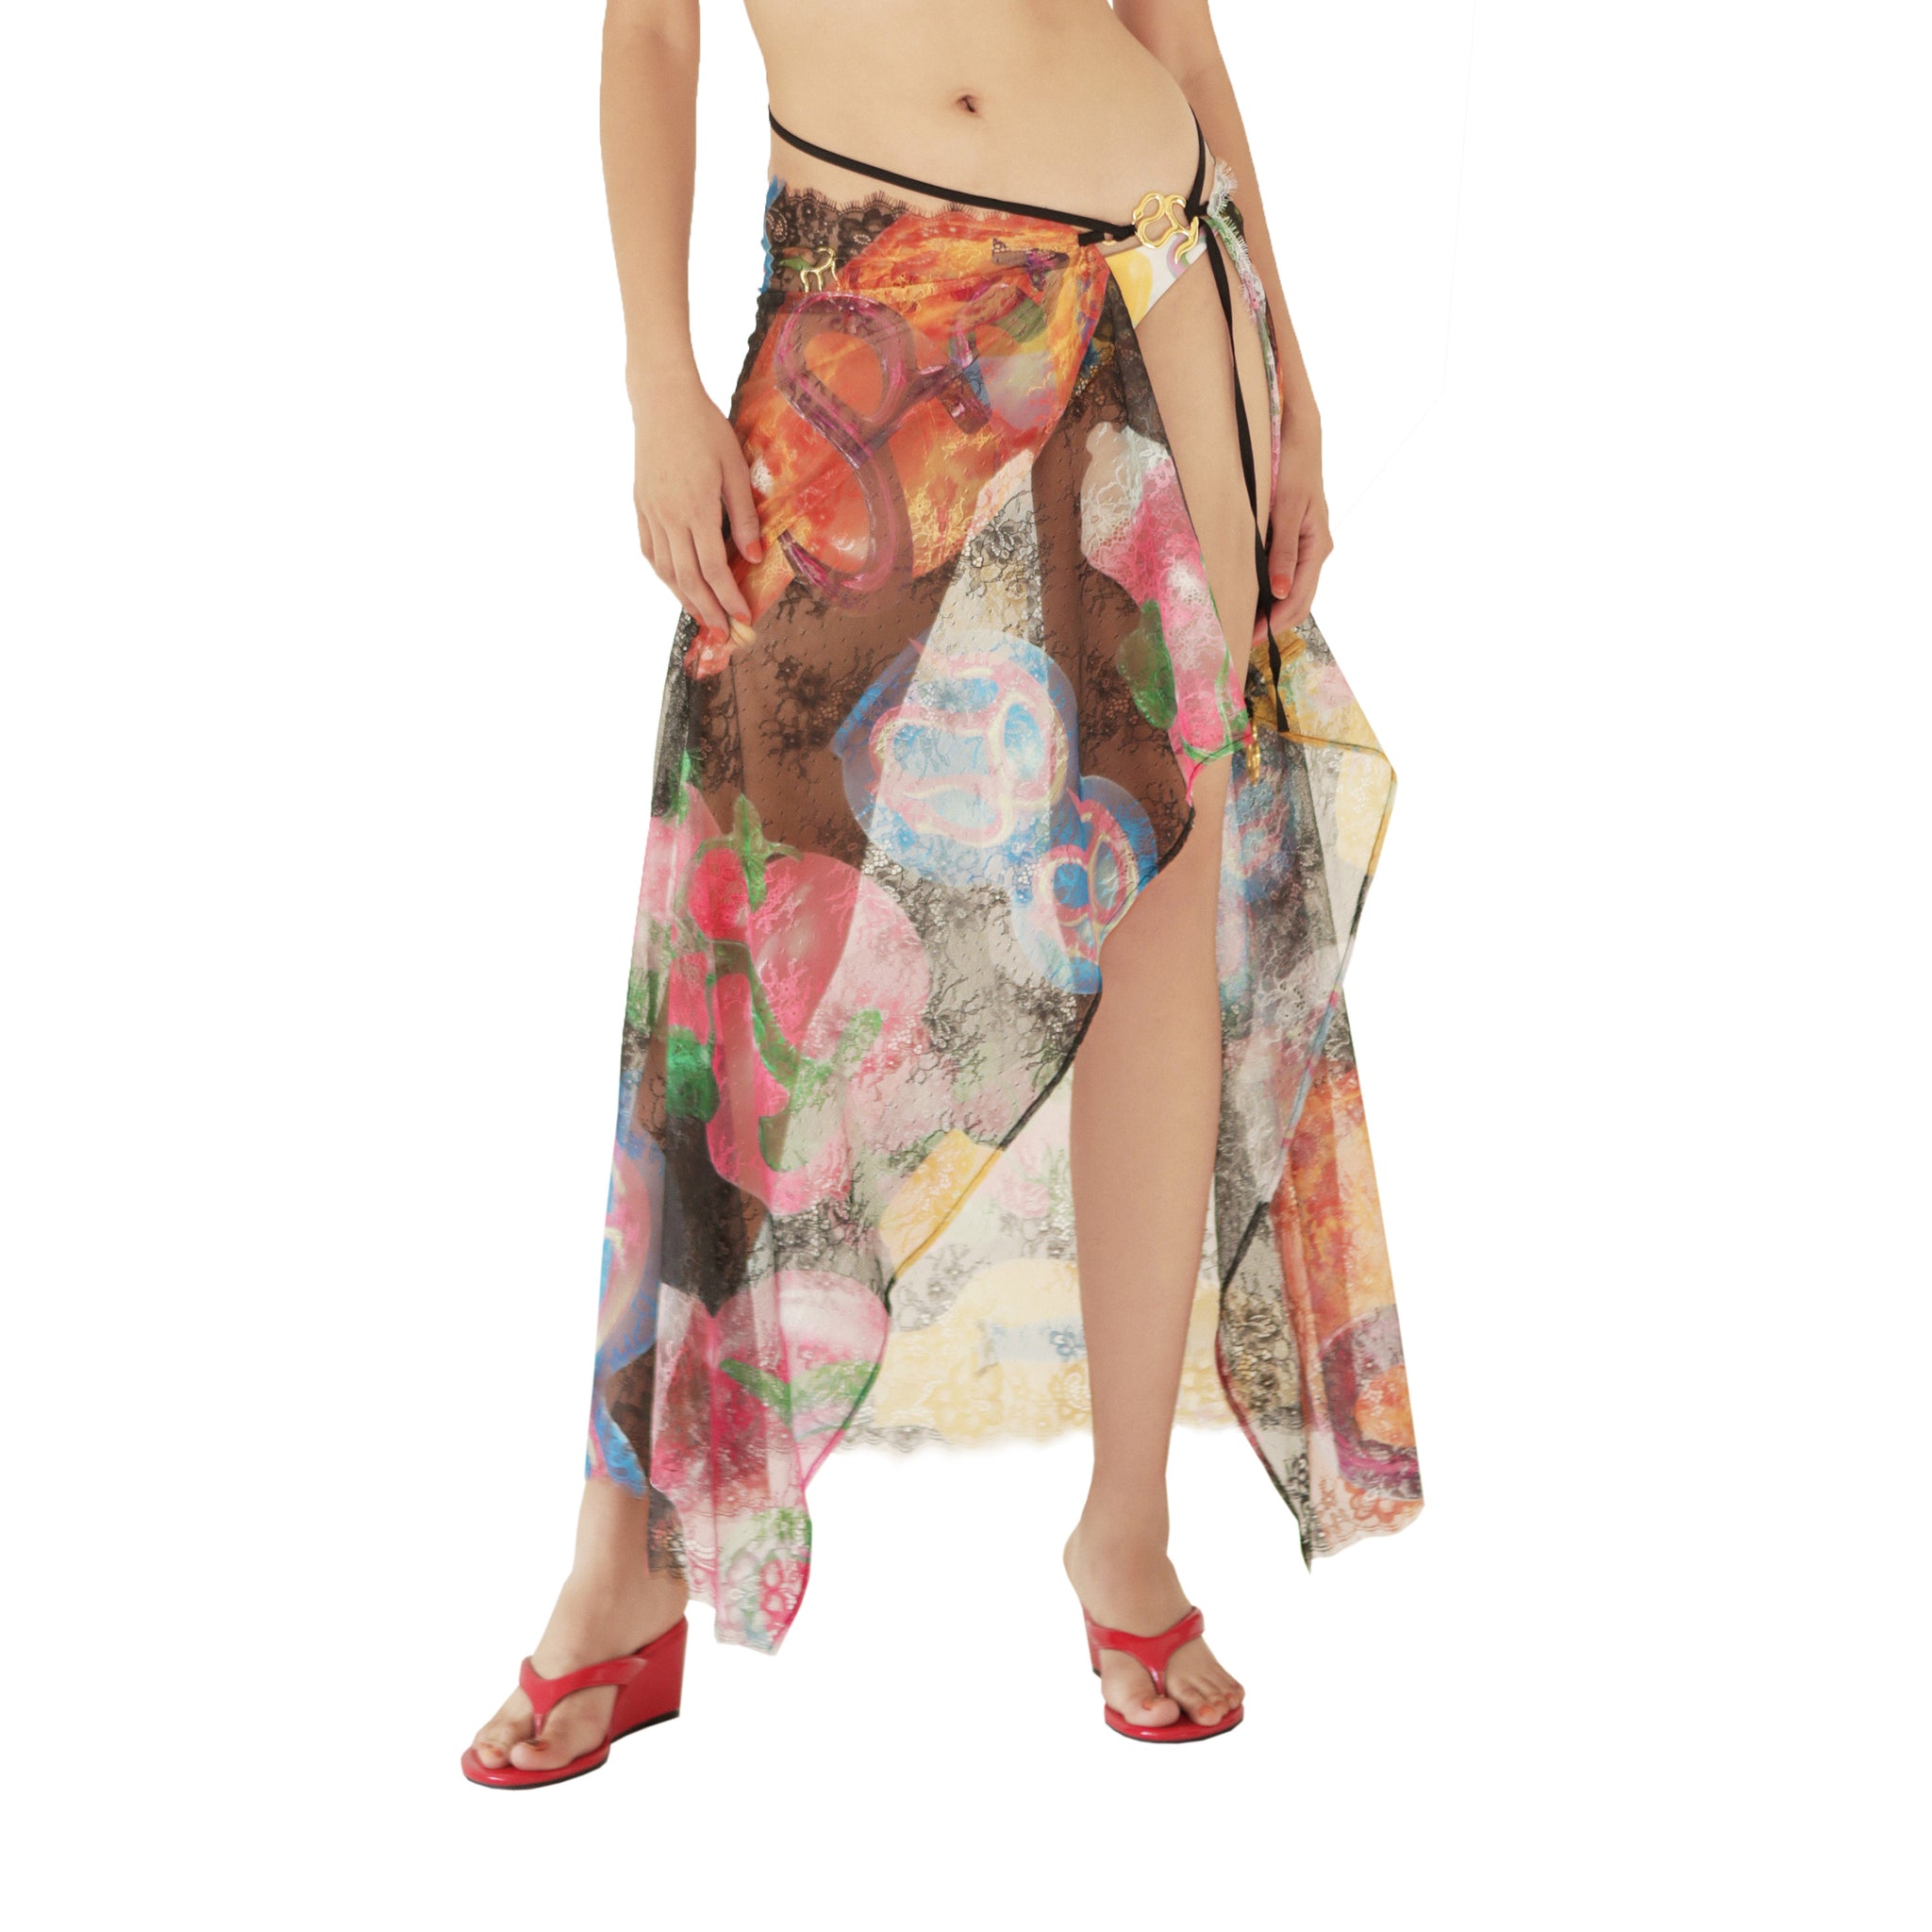 20%OFF Print Lace Scarf Cover Up